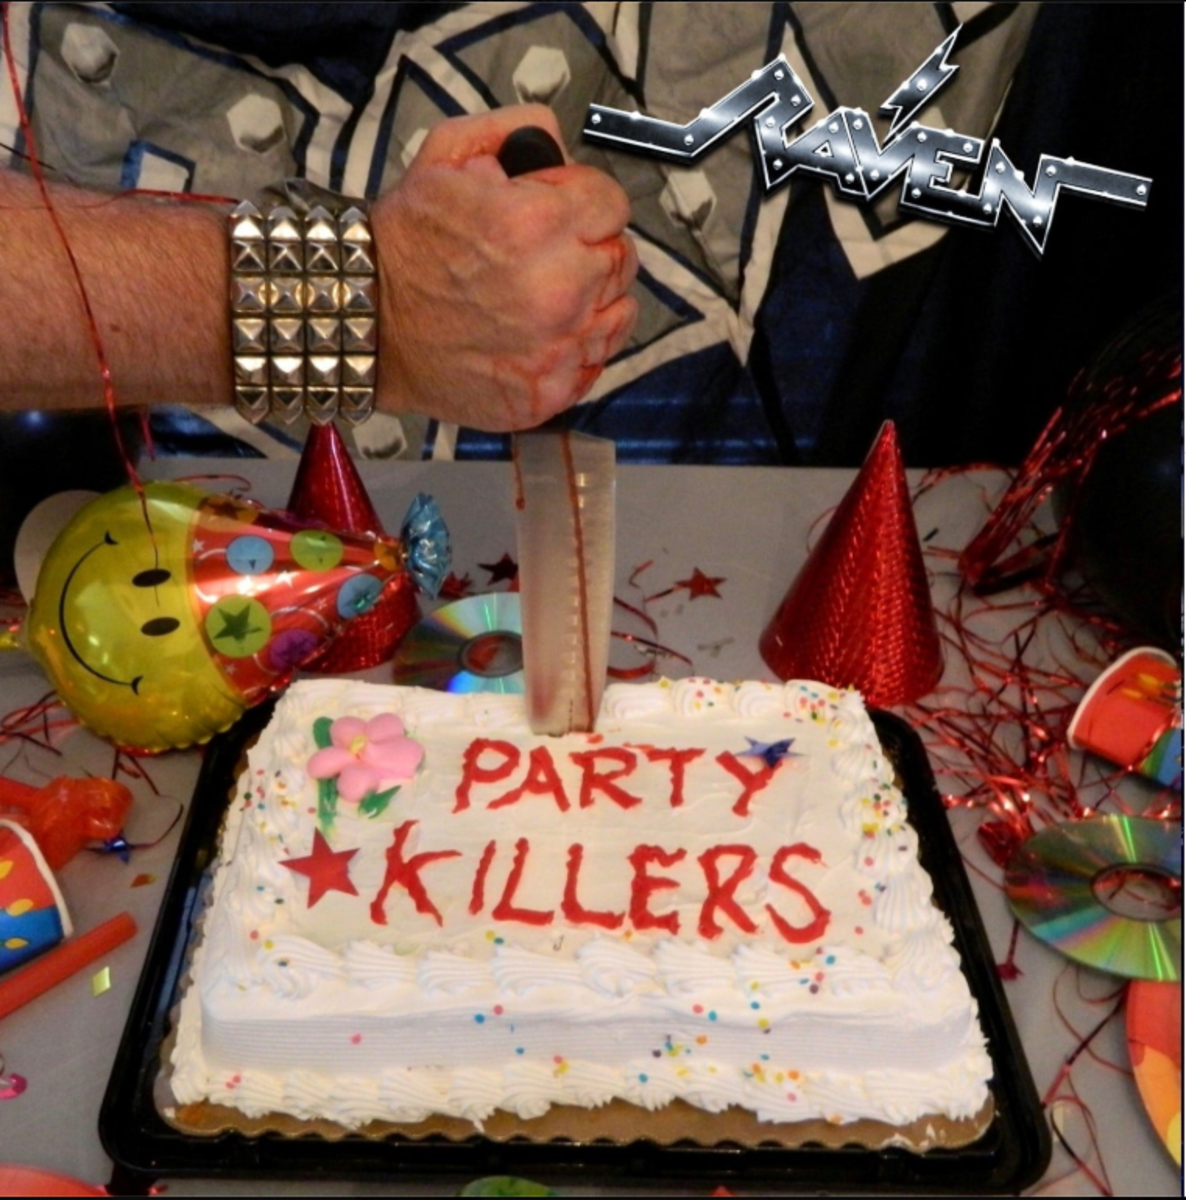 Raven "Party Killers" CD Cover